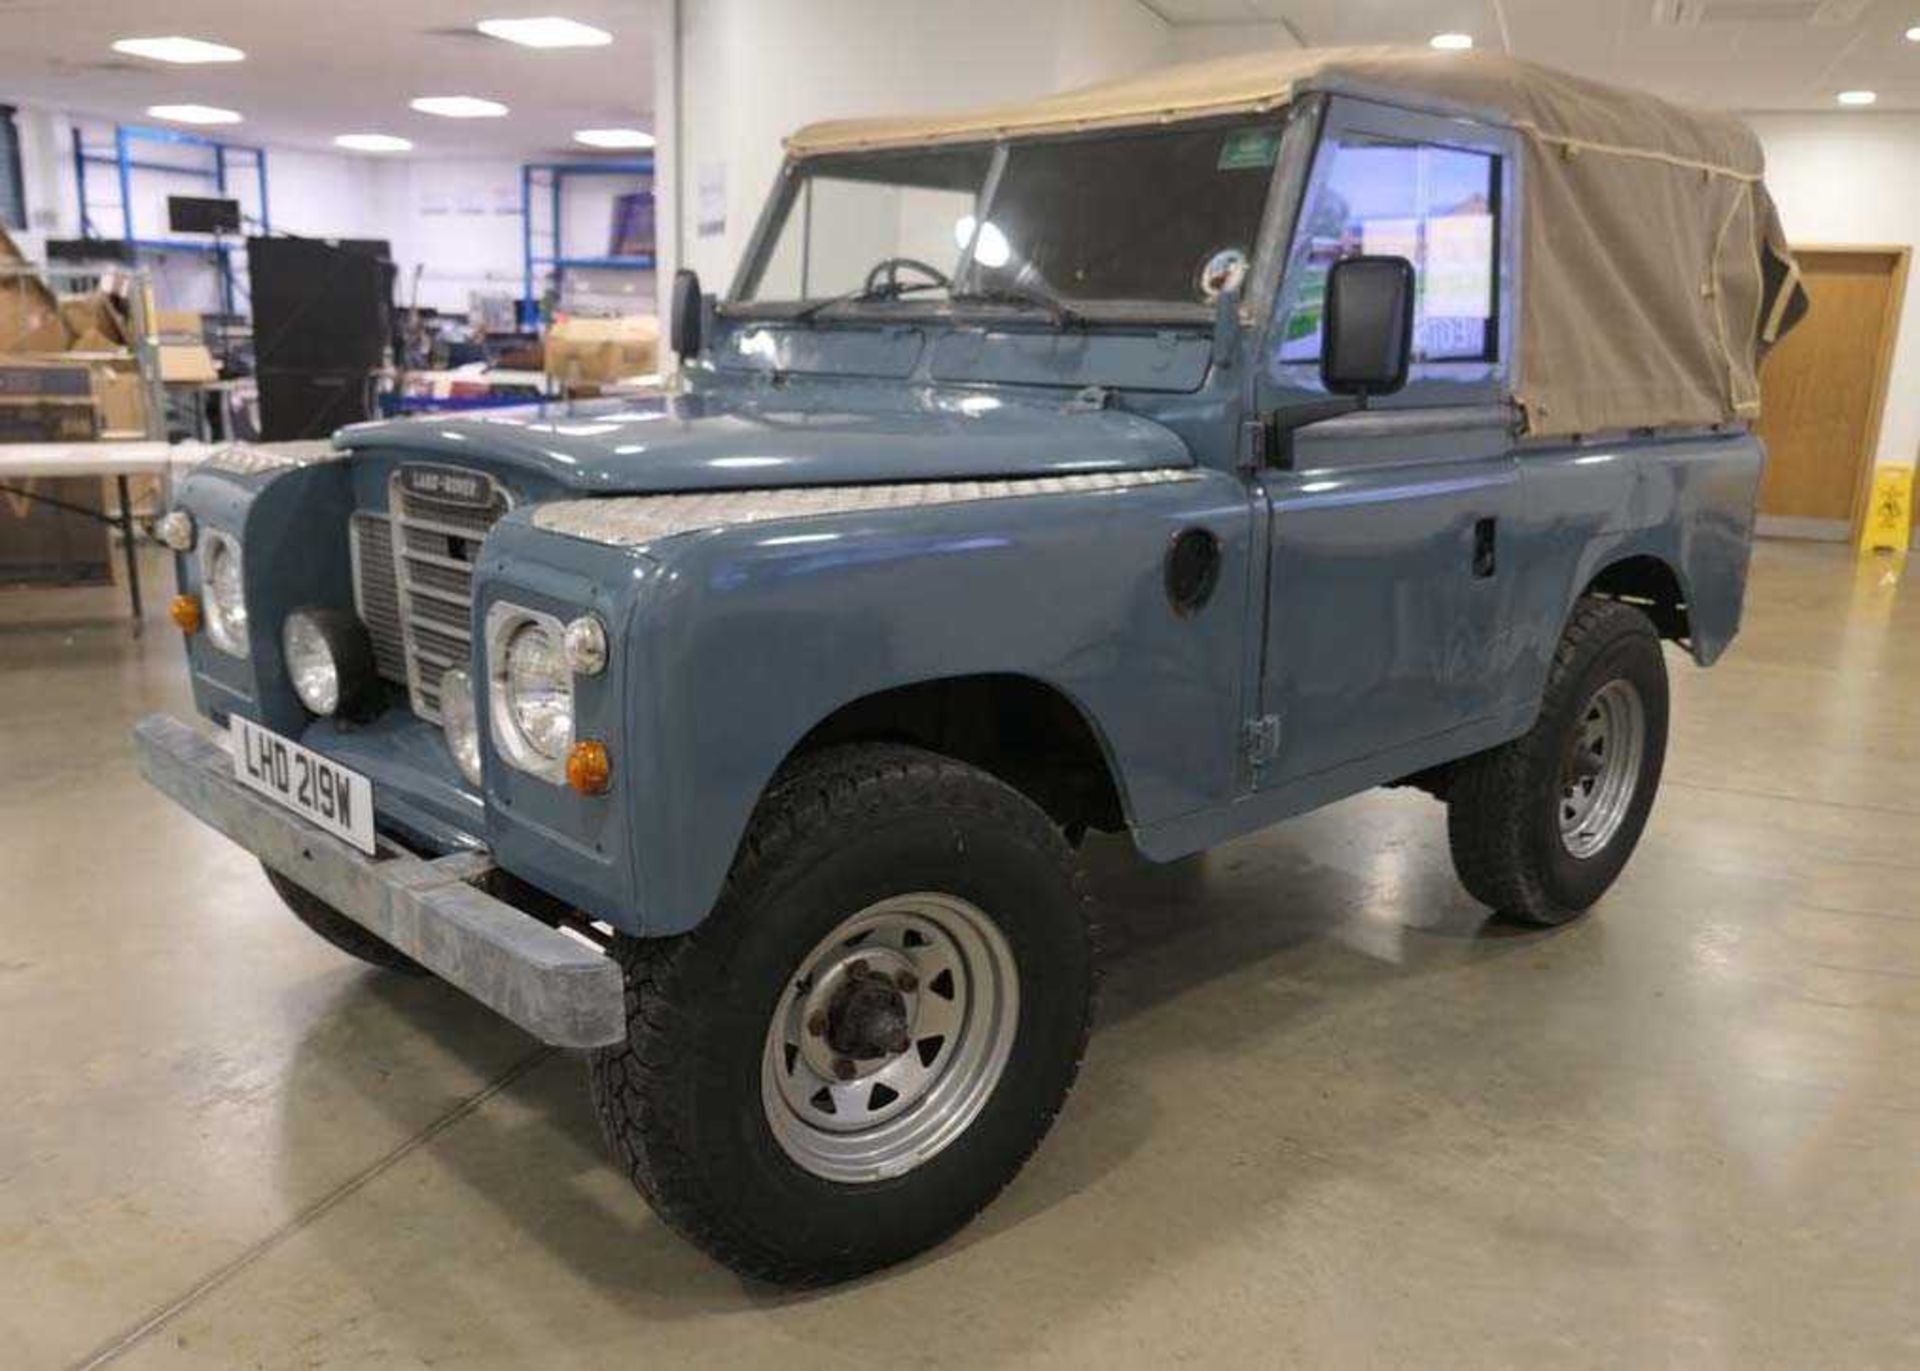 (LHD 219W) 1981 Land Rover Series 3, light 4x4 utility, 88" - 4 cyl in blue, first registered 01. - Image 3 of 17